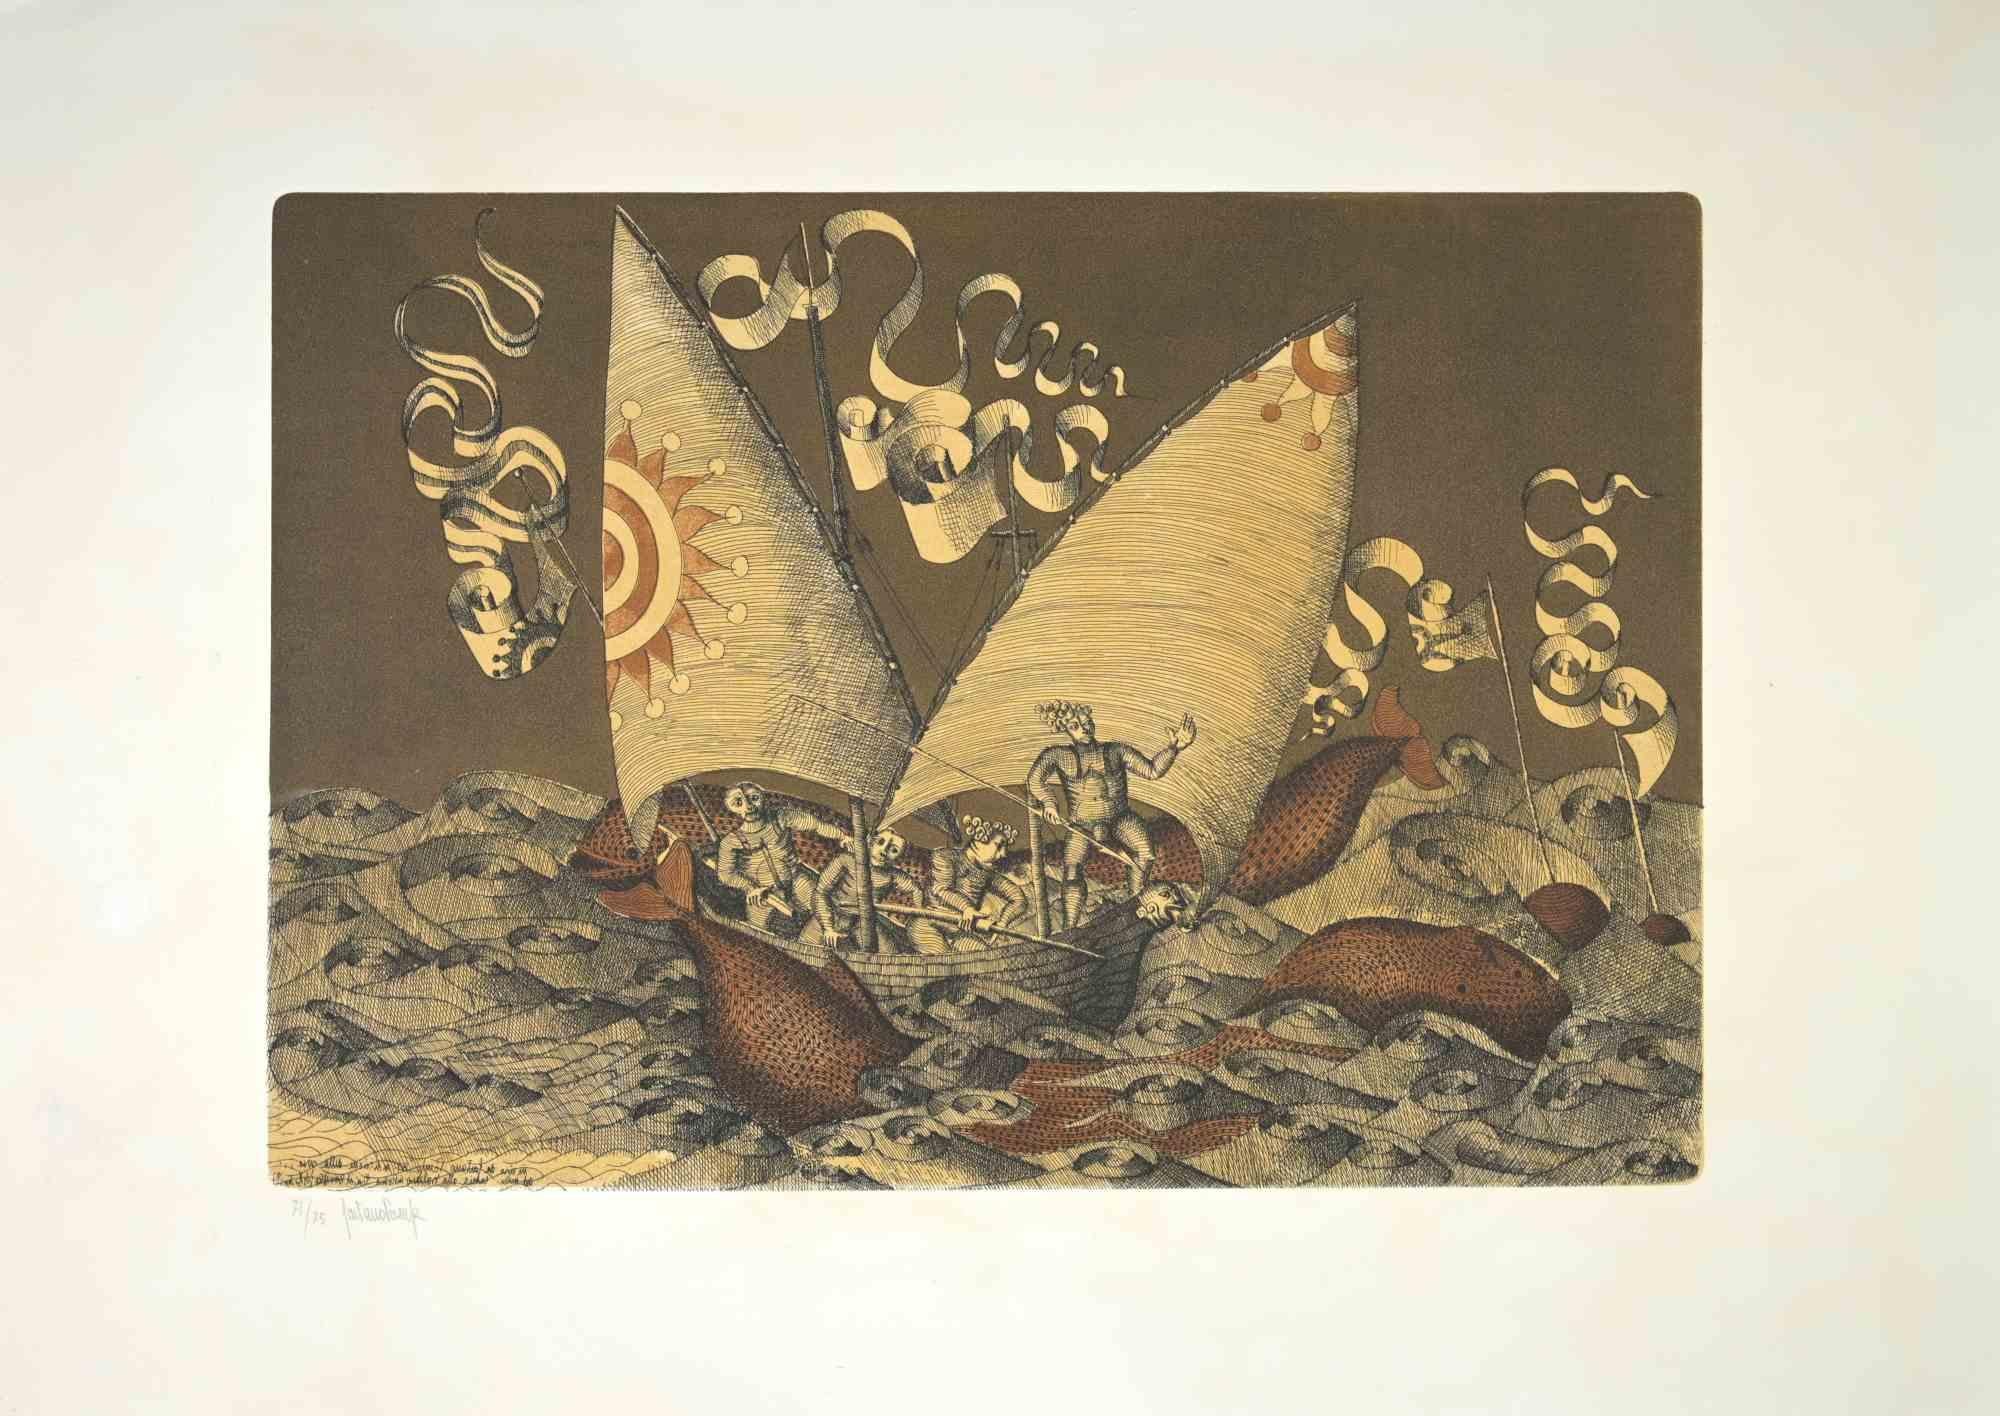 The Boat  is an artwork realized by Gaetano Pompa (1933, Forenza- 1998) in 1970s.

The artwork is  an aquatint and etching on paper.

Hand signed on the left corner. Edition of 75, numbered, 71. 

Excellent condition.

Gaetano Pompa  was born in